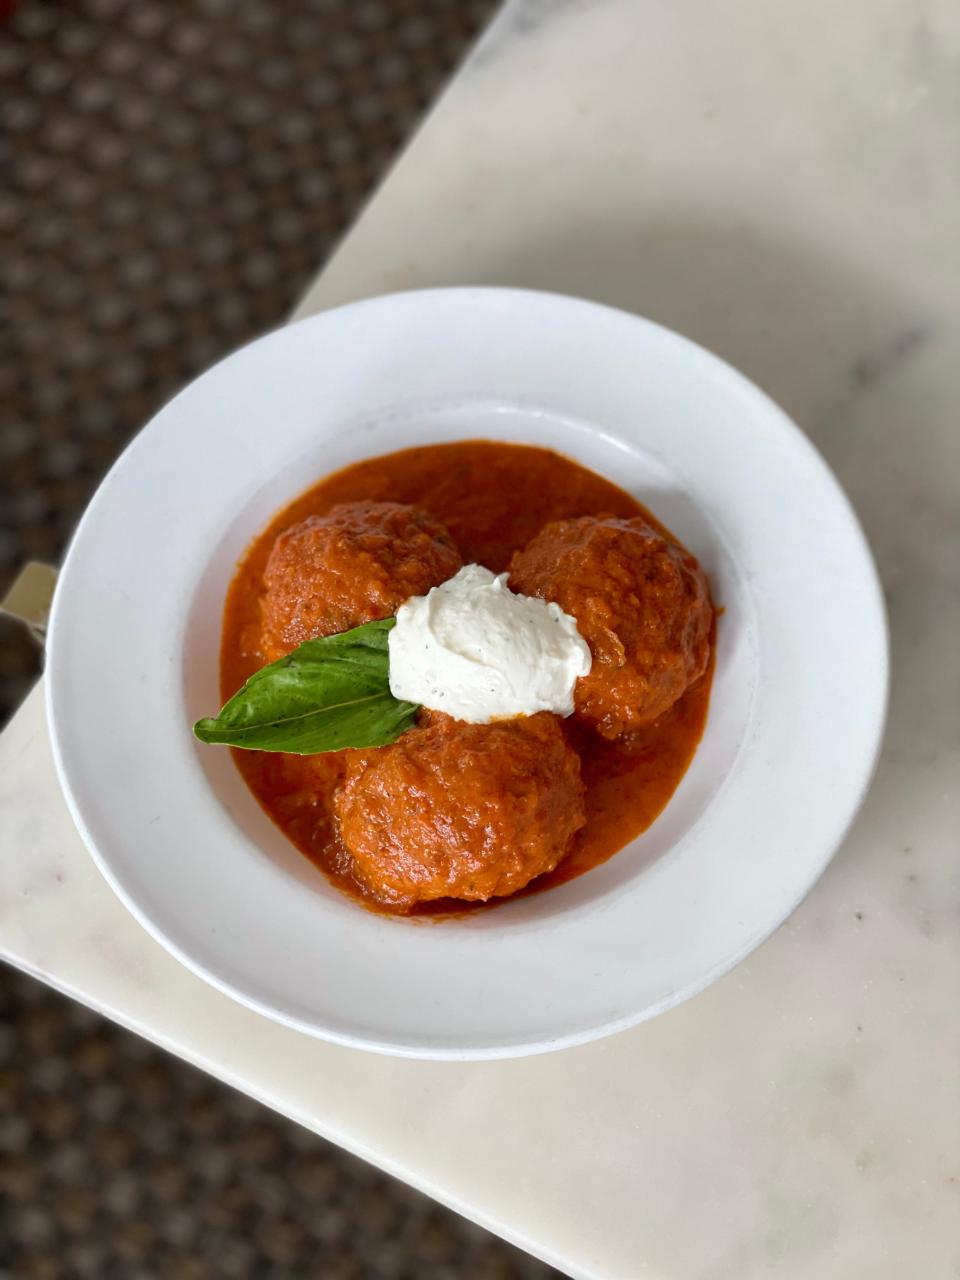 Lynora's meatballs are the star of the local restaurant chain's popular Meatball Mondays.